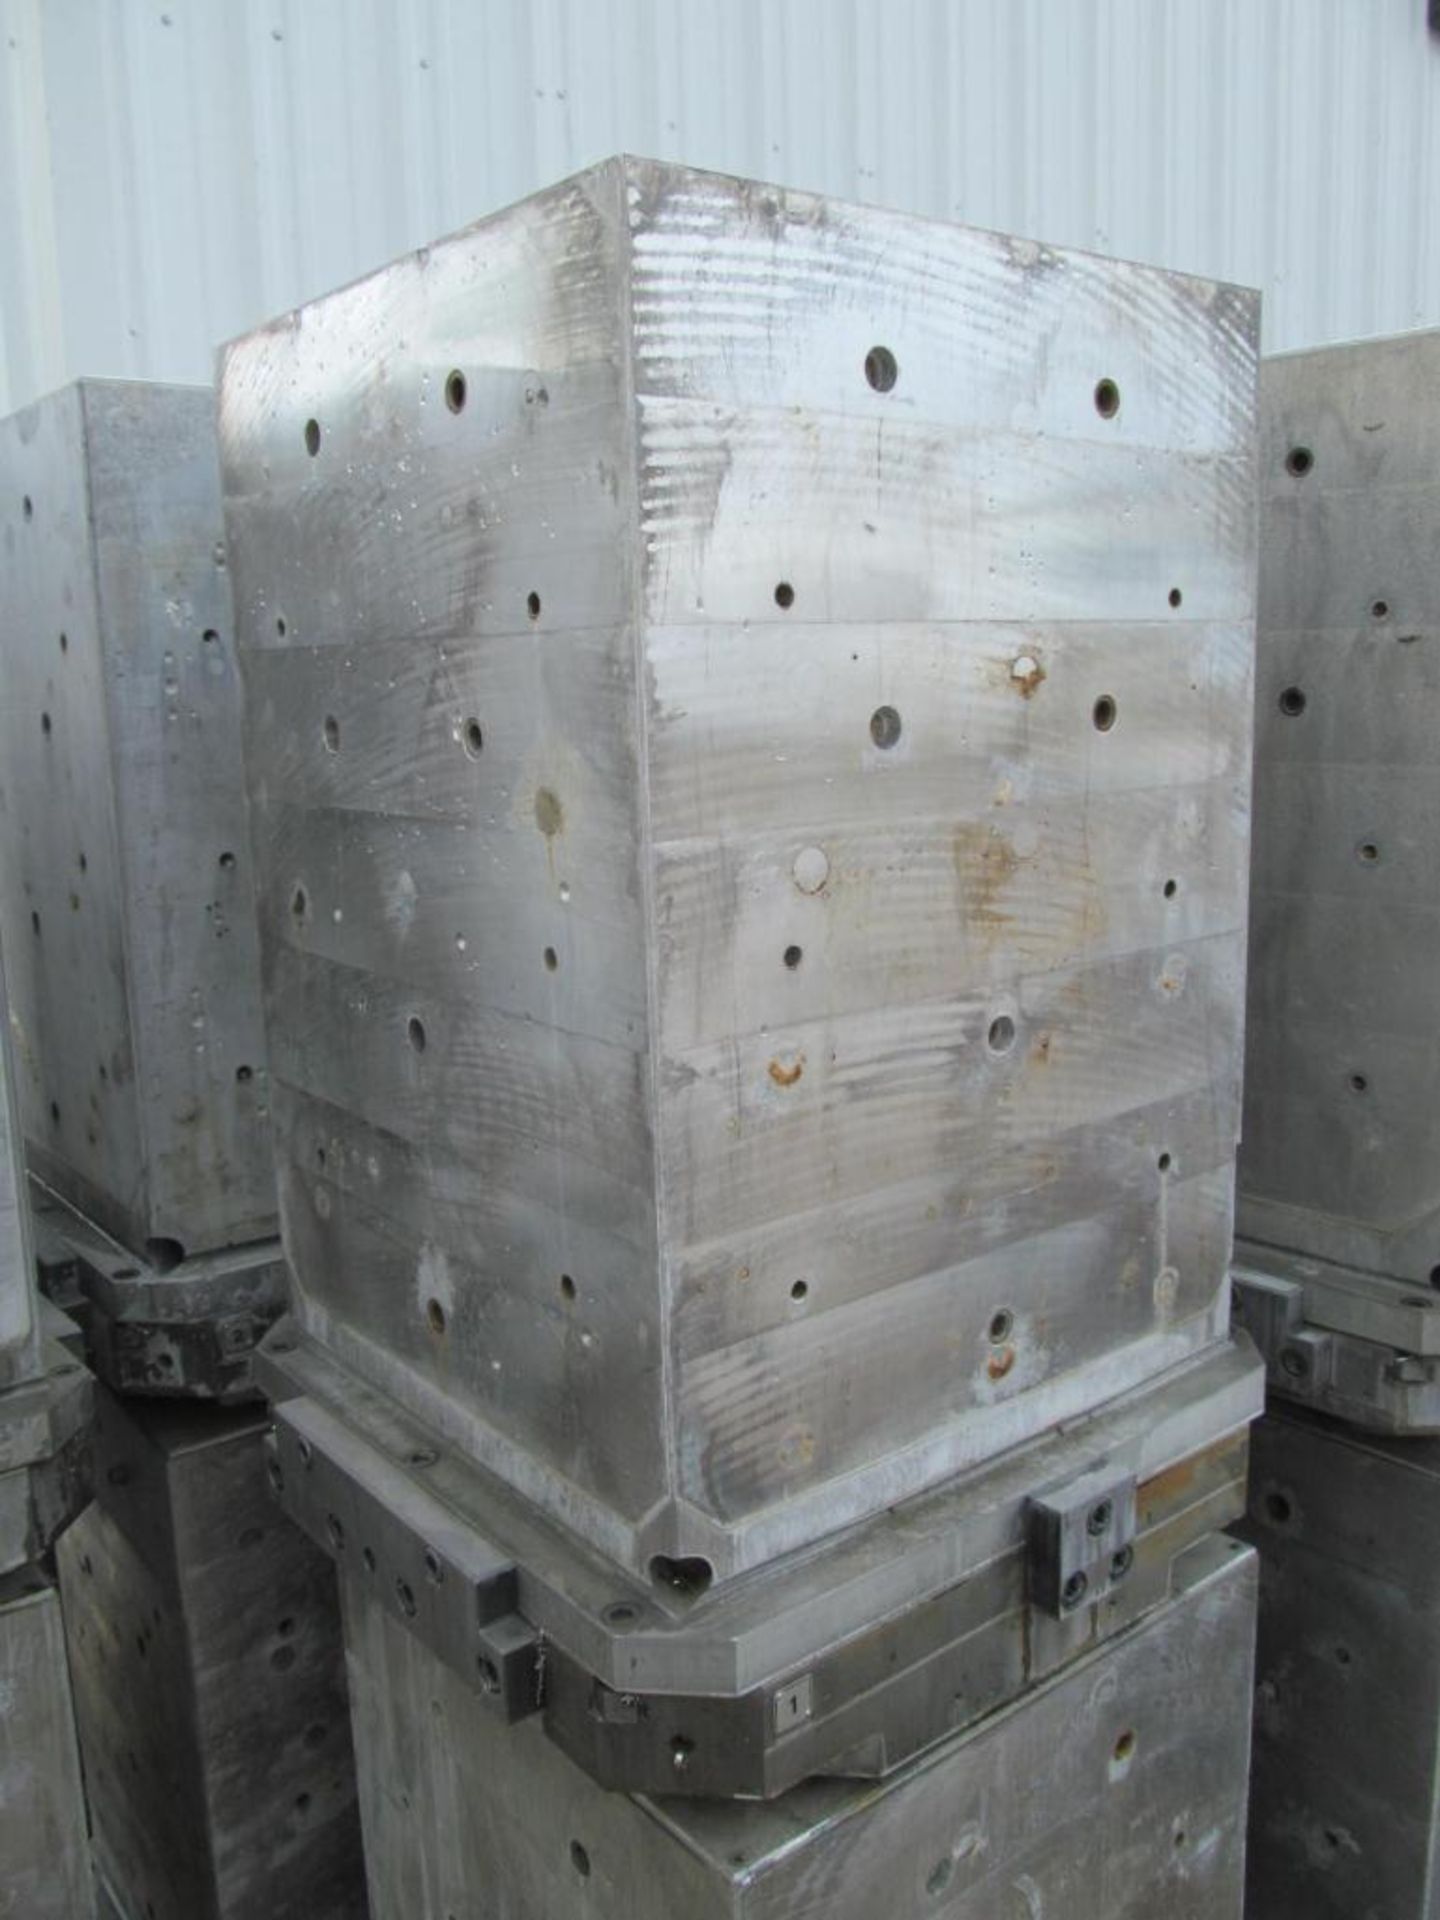 Lot of (4) Pallets w/ Tombstones for Mazak FH-6800 Horizontal Machining Center - Image 2 of 2